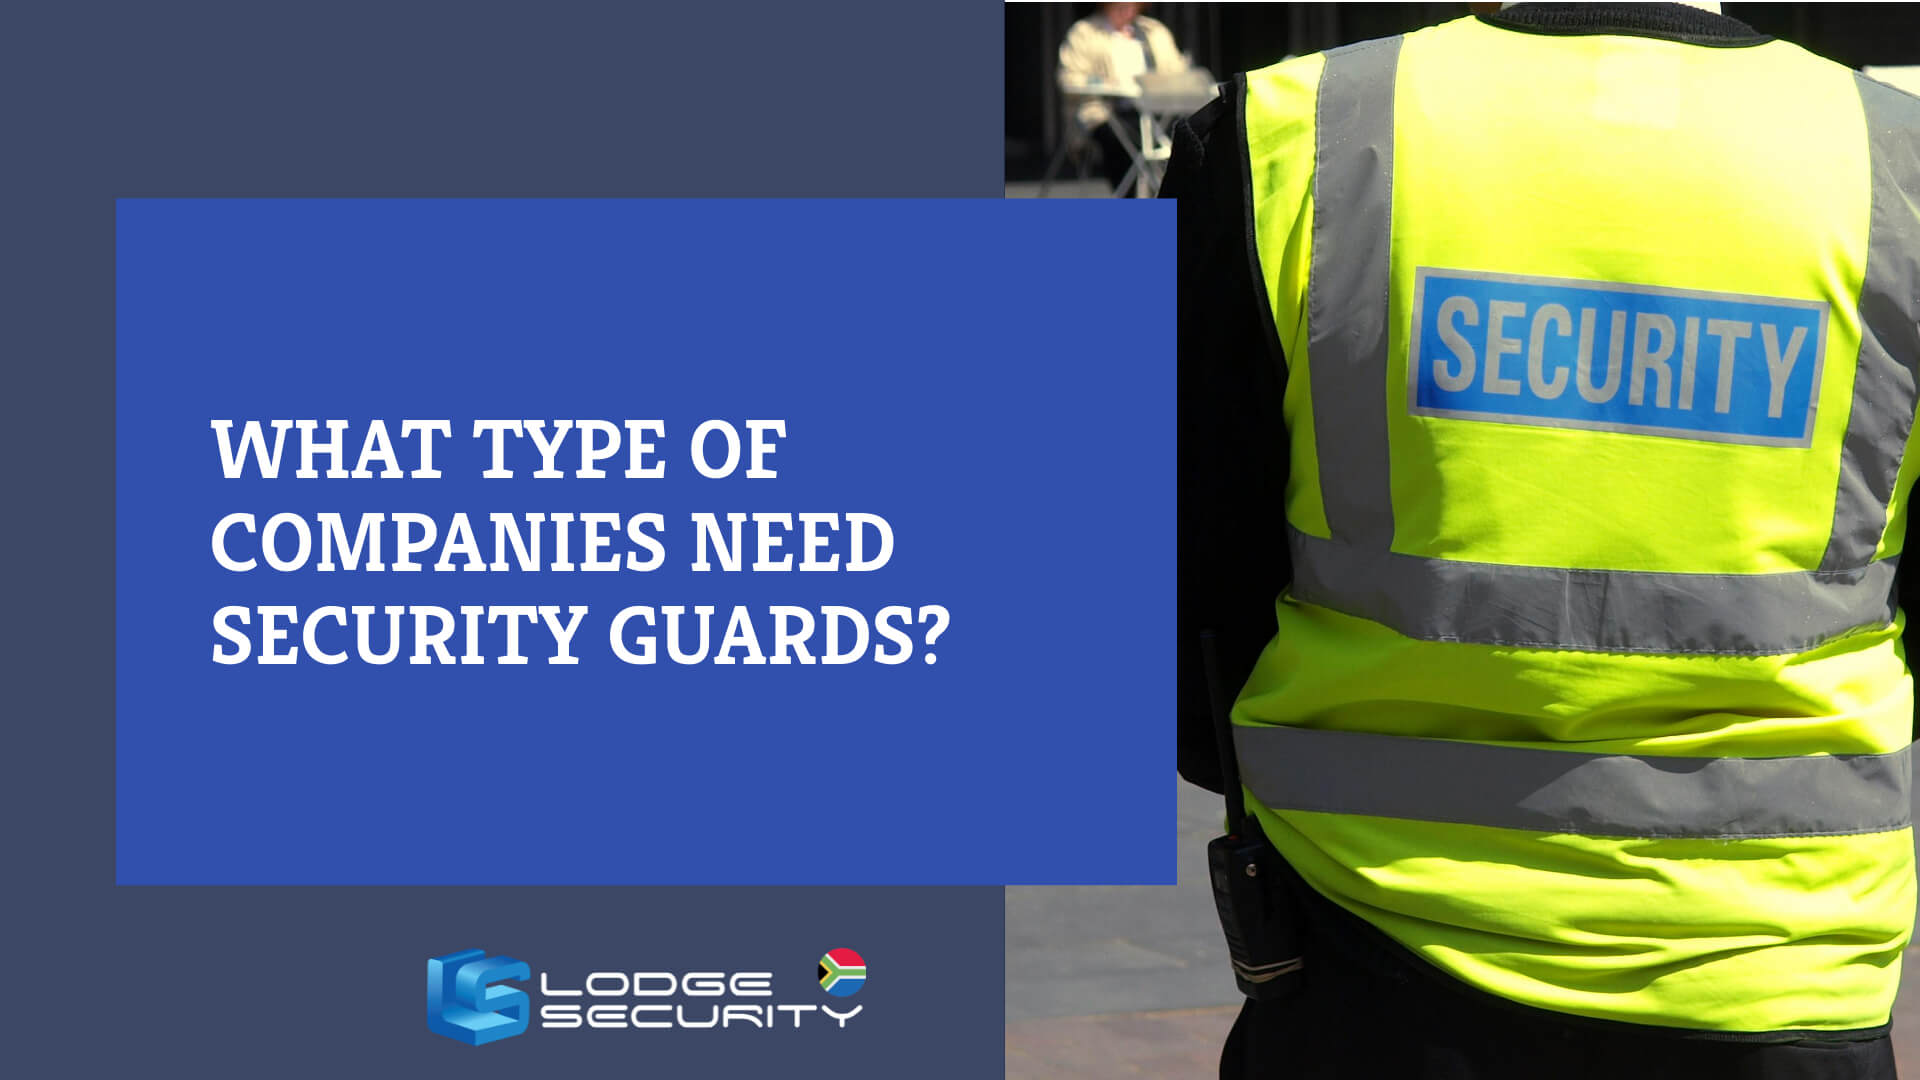 What type of companies need security guards?